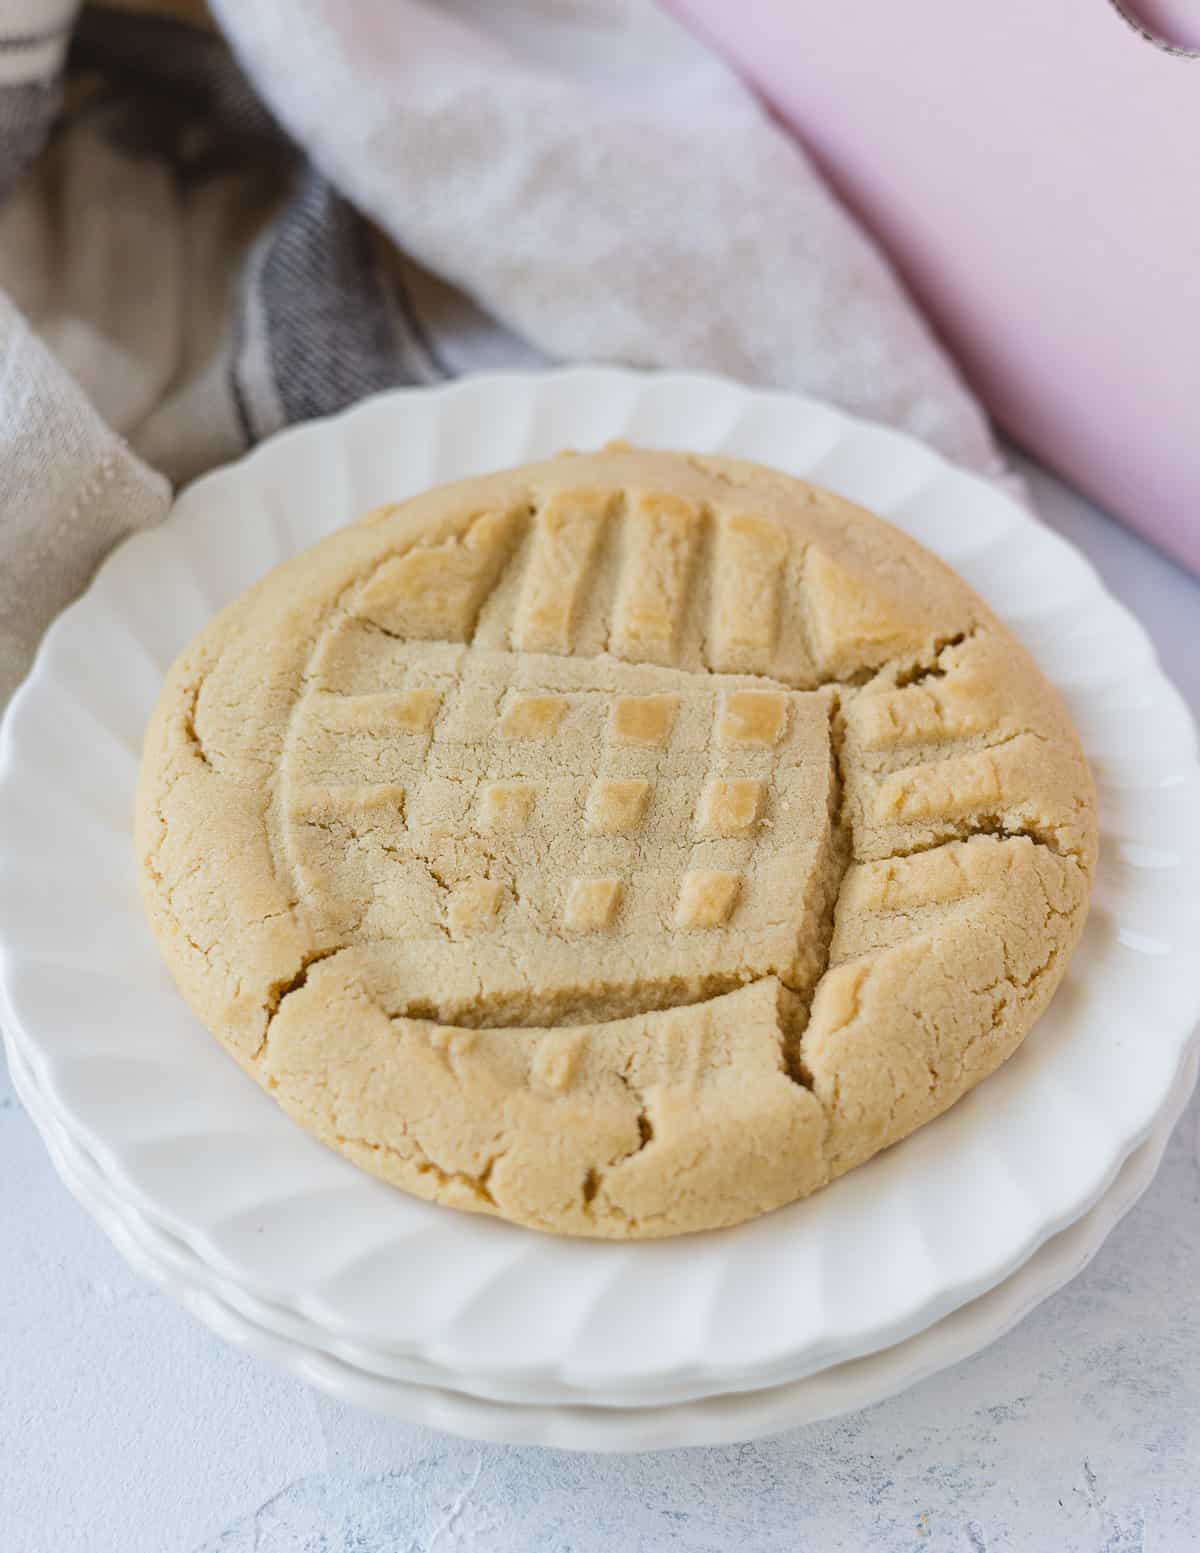 A Peanut Butter Cookie with a cross-hatch design on a stack of plates.